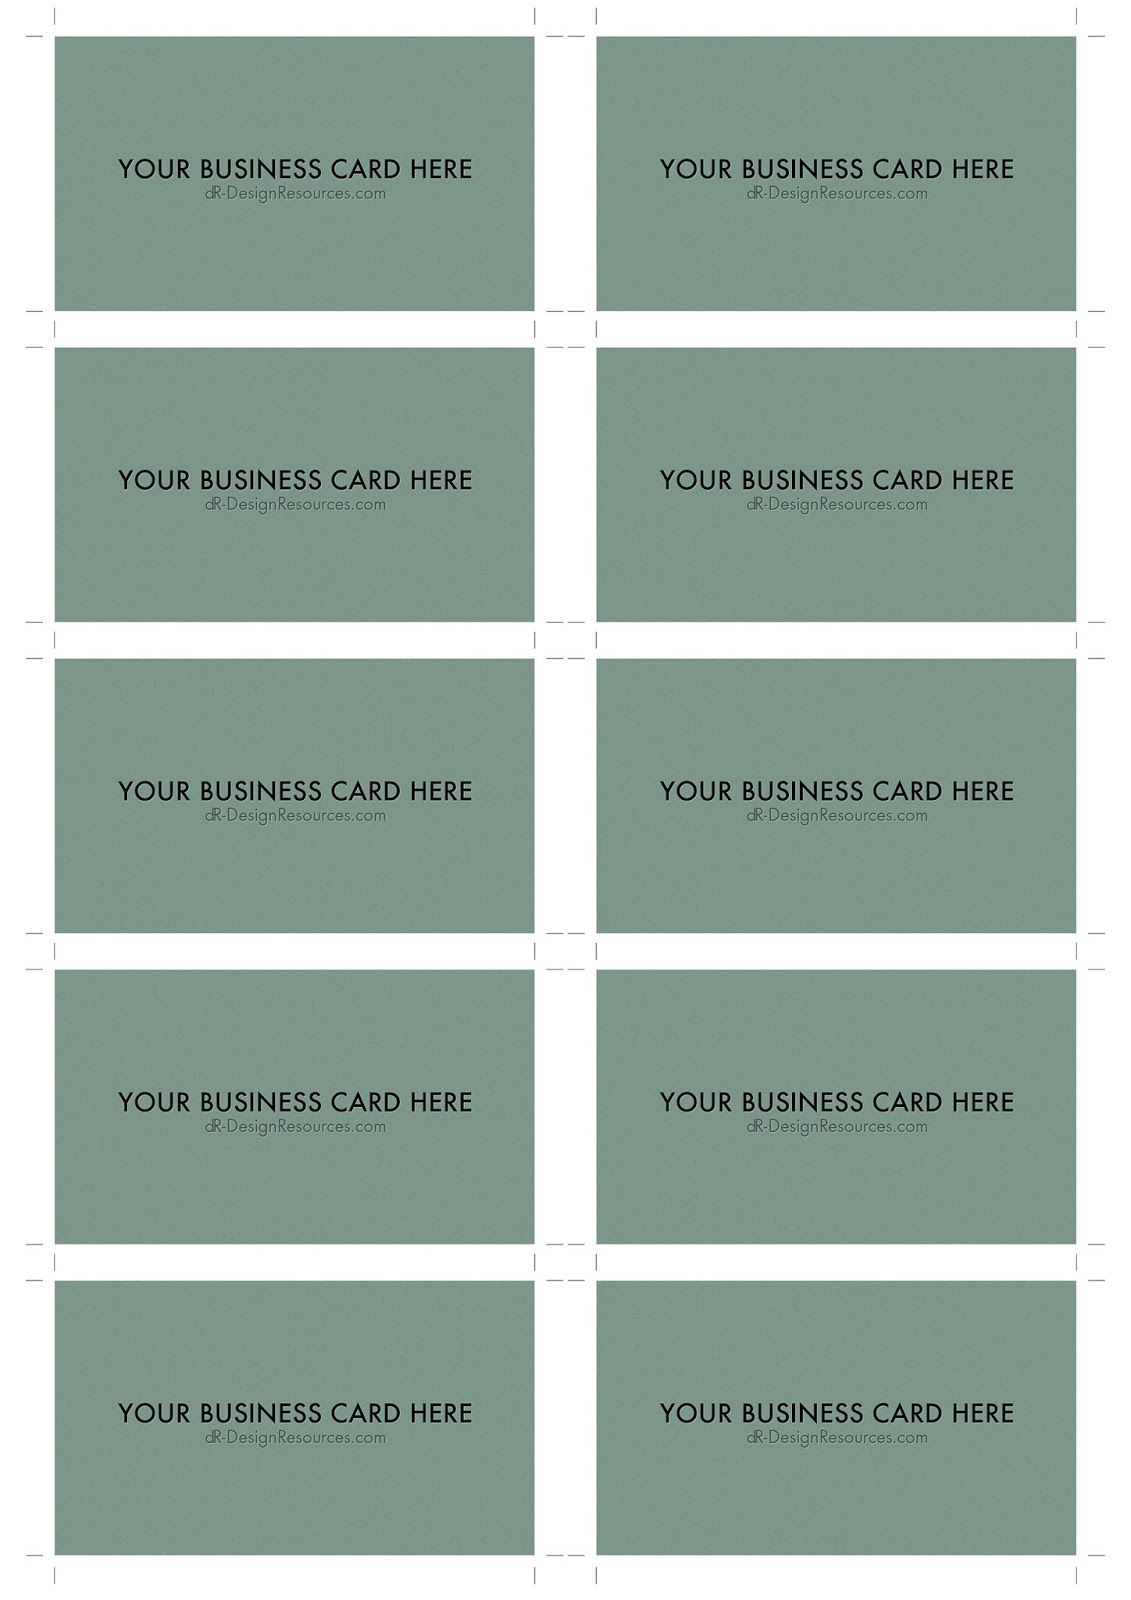 how to print multiple business cards on one sheet 3